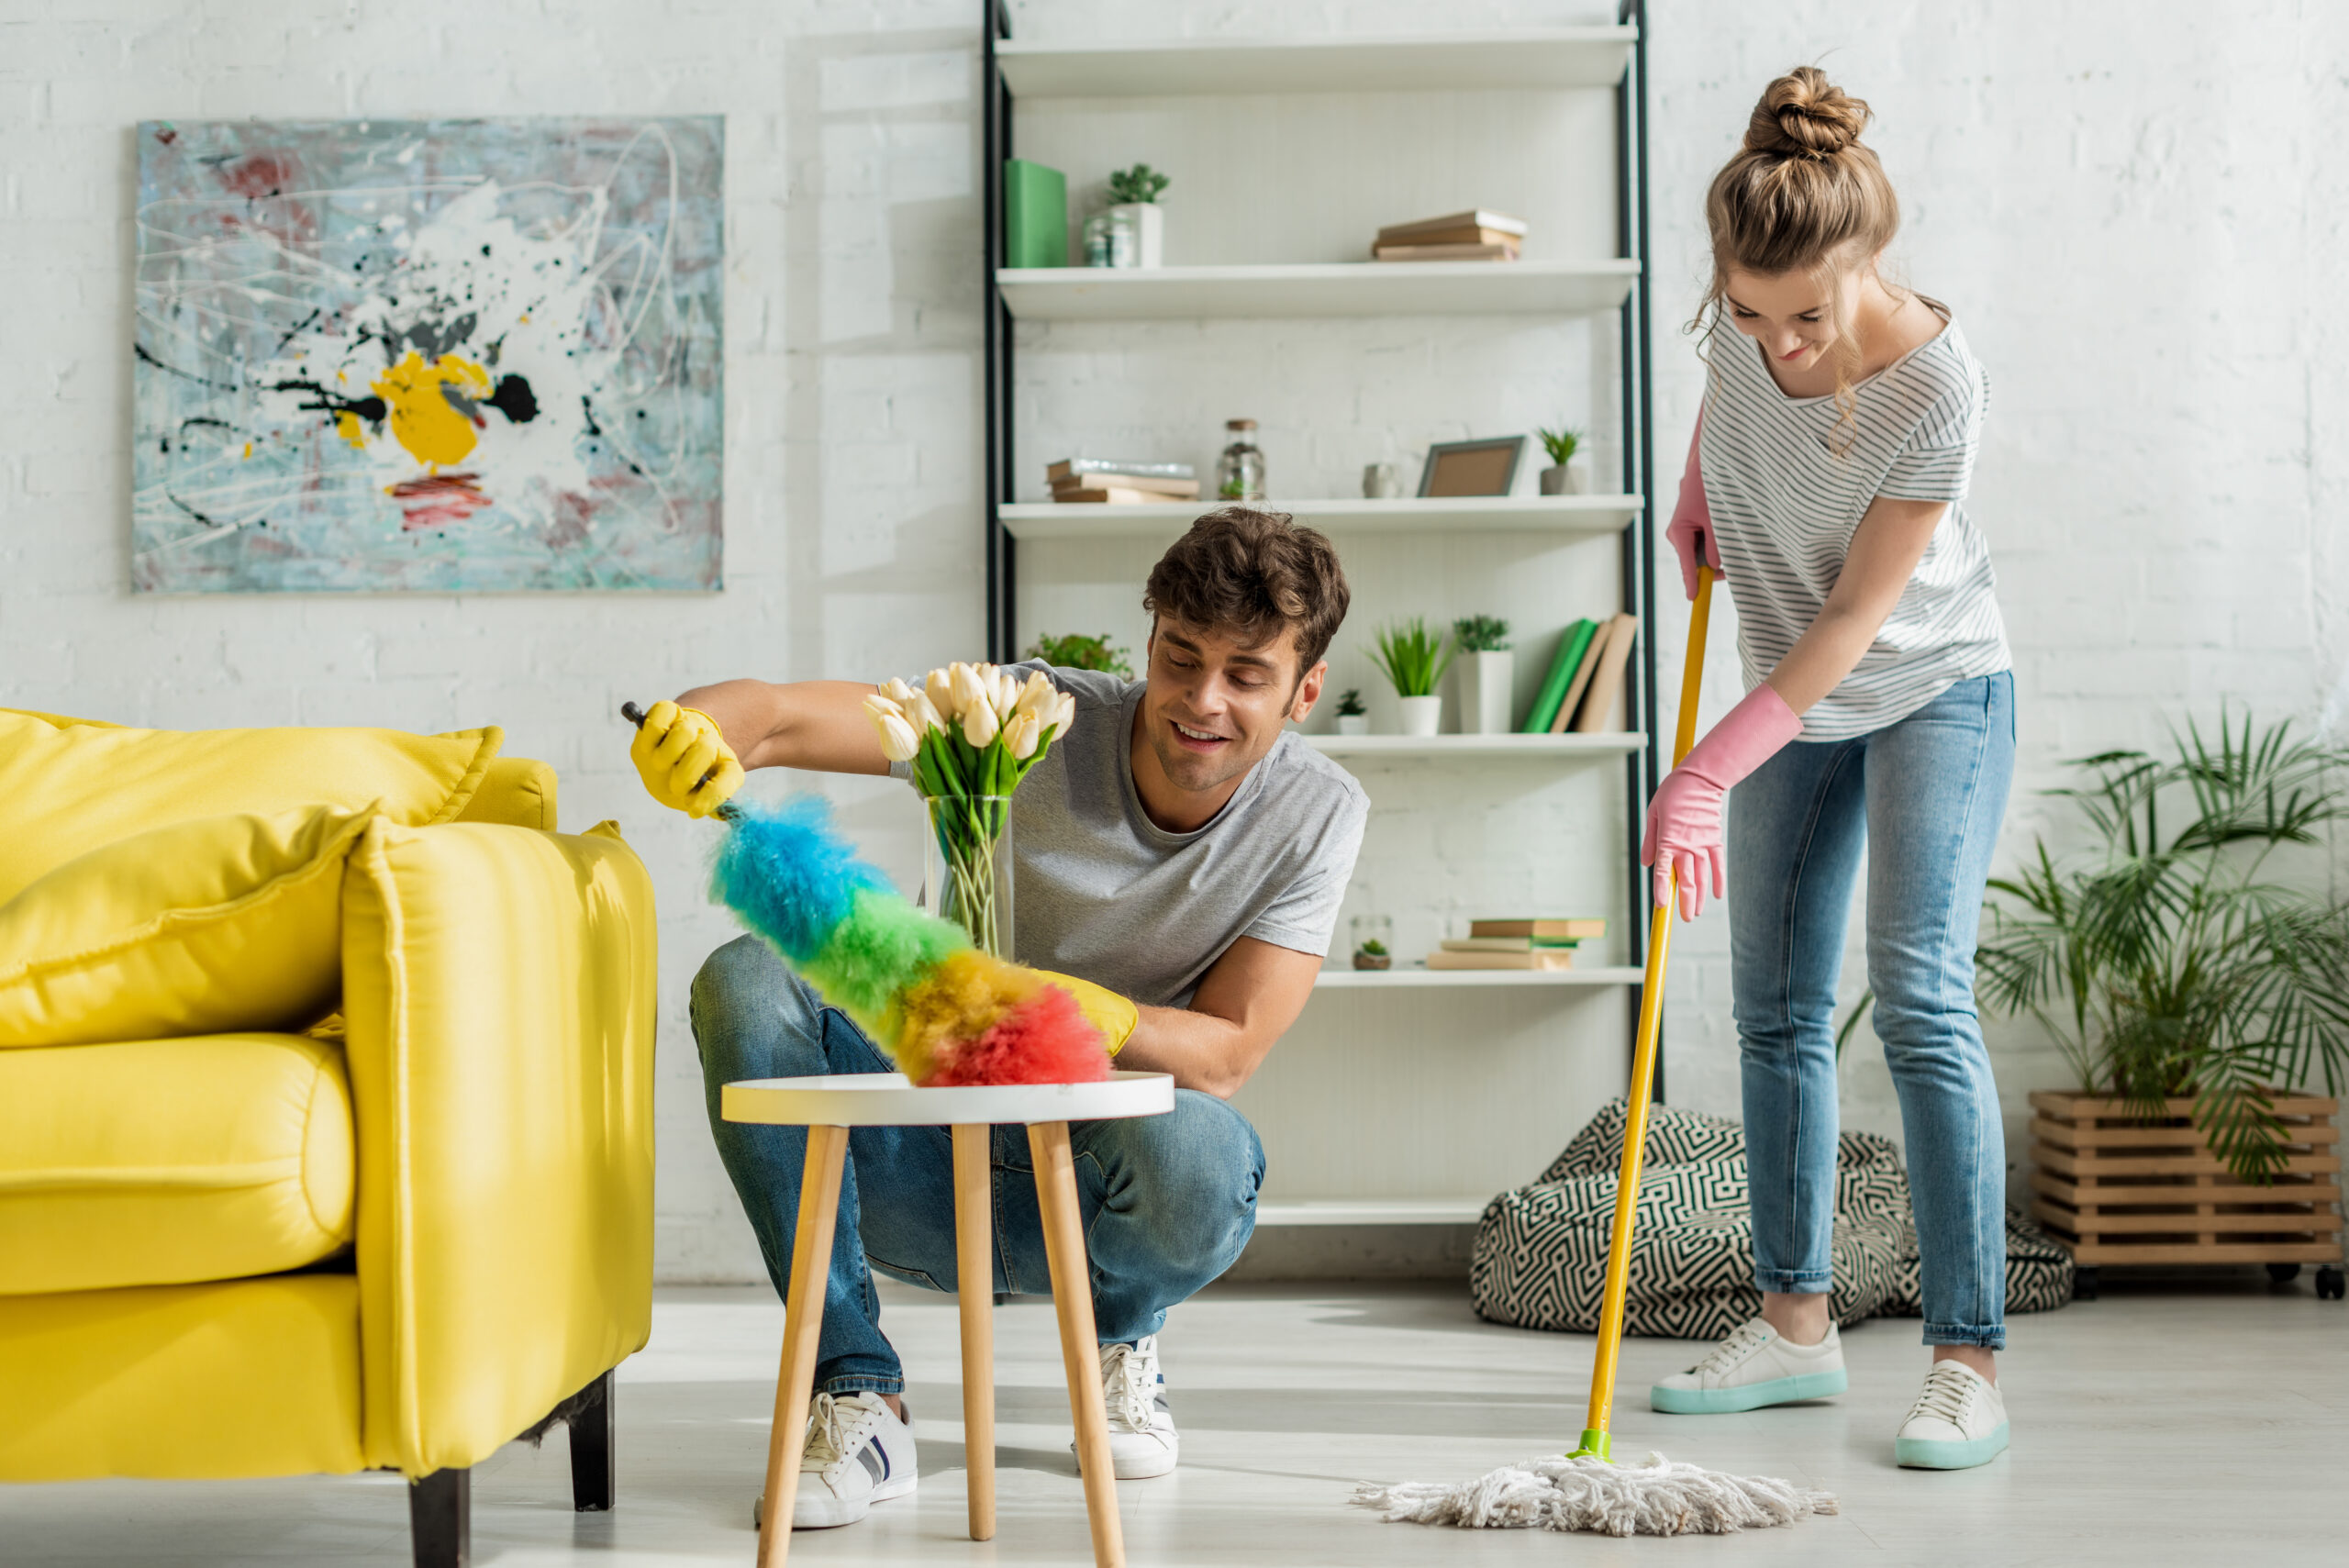 5 surprising ways spring cleaning boosts your health and wellness